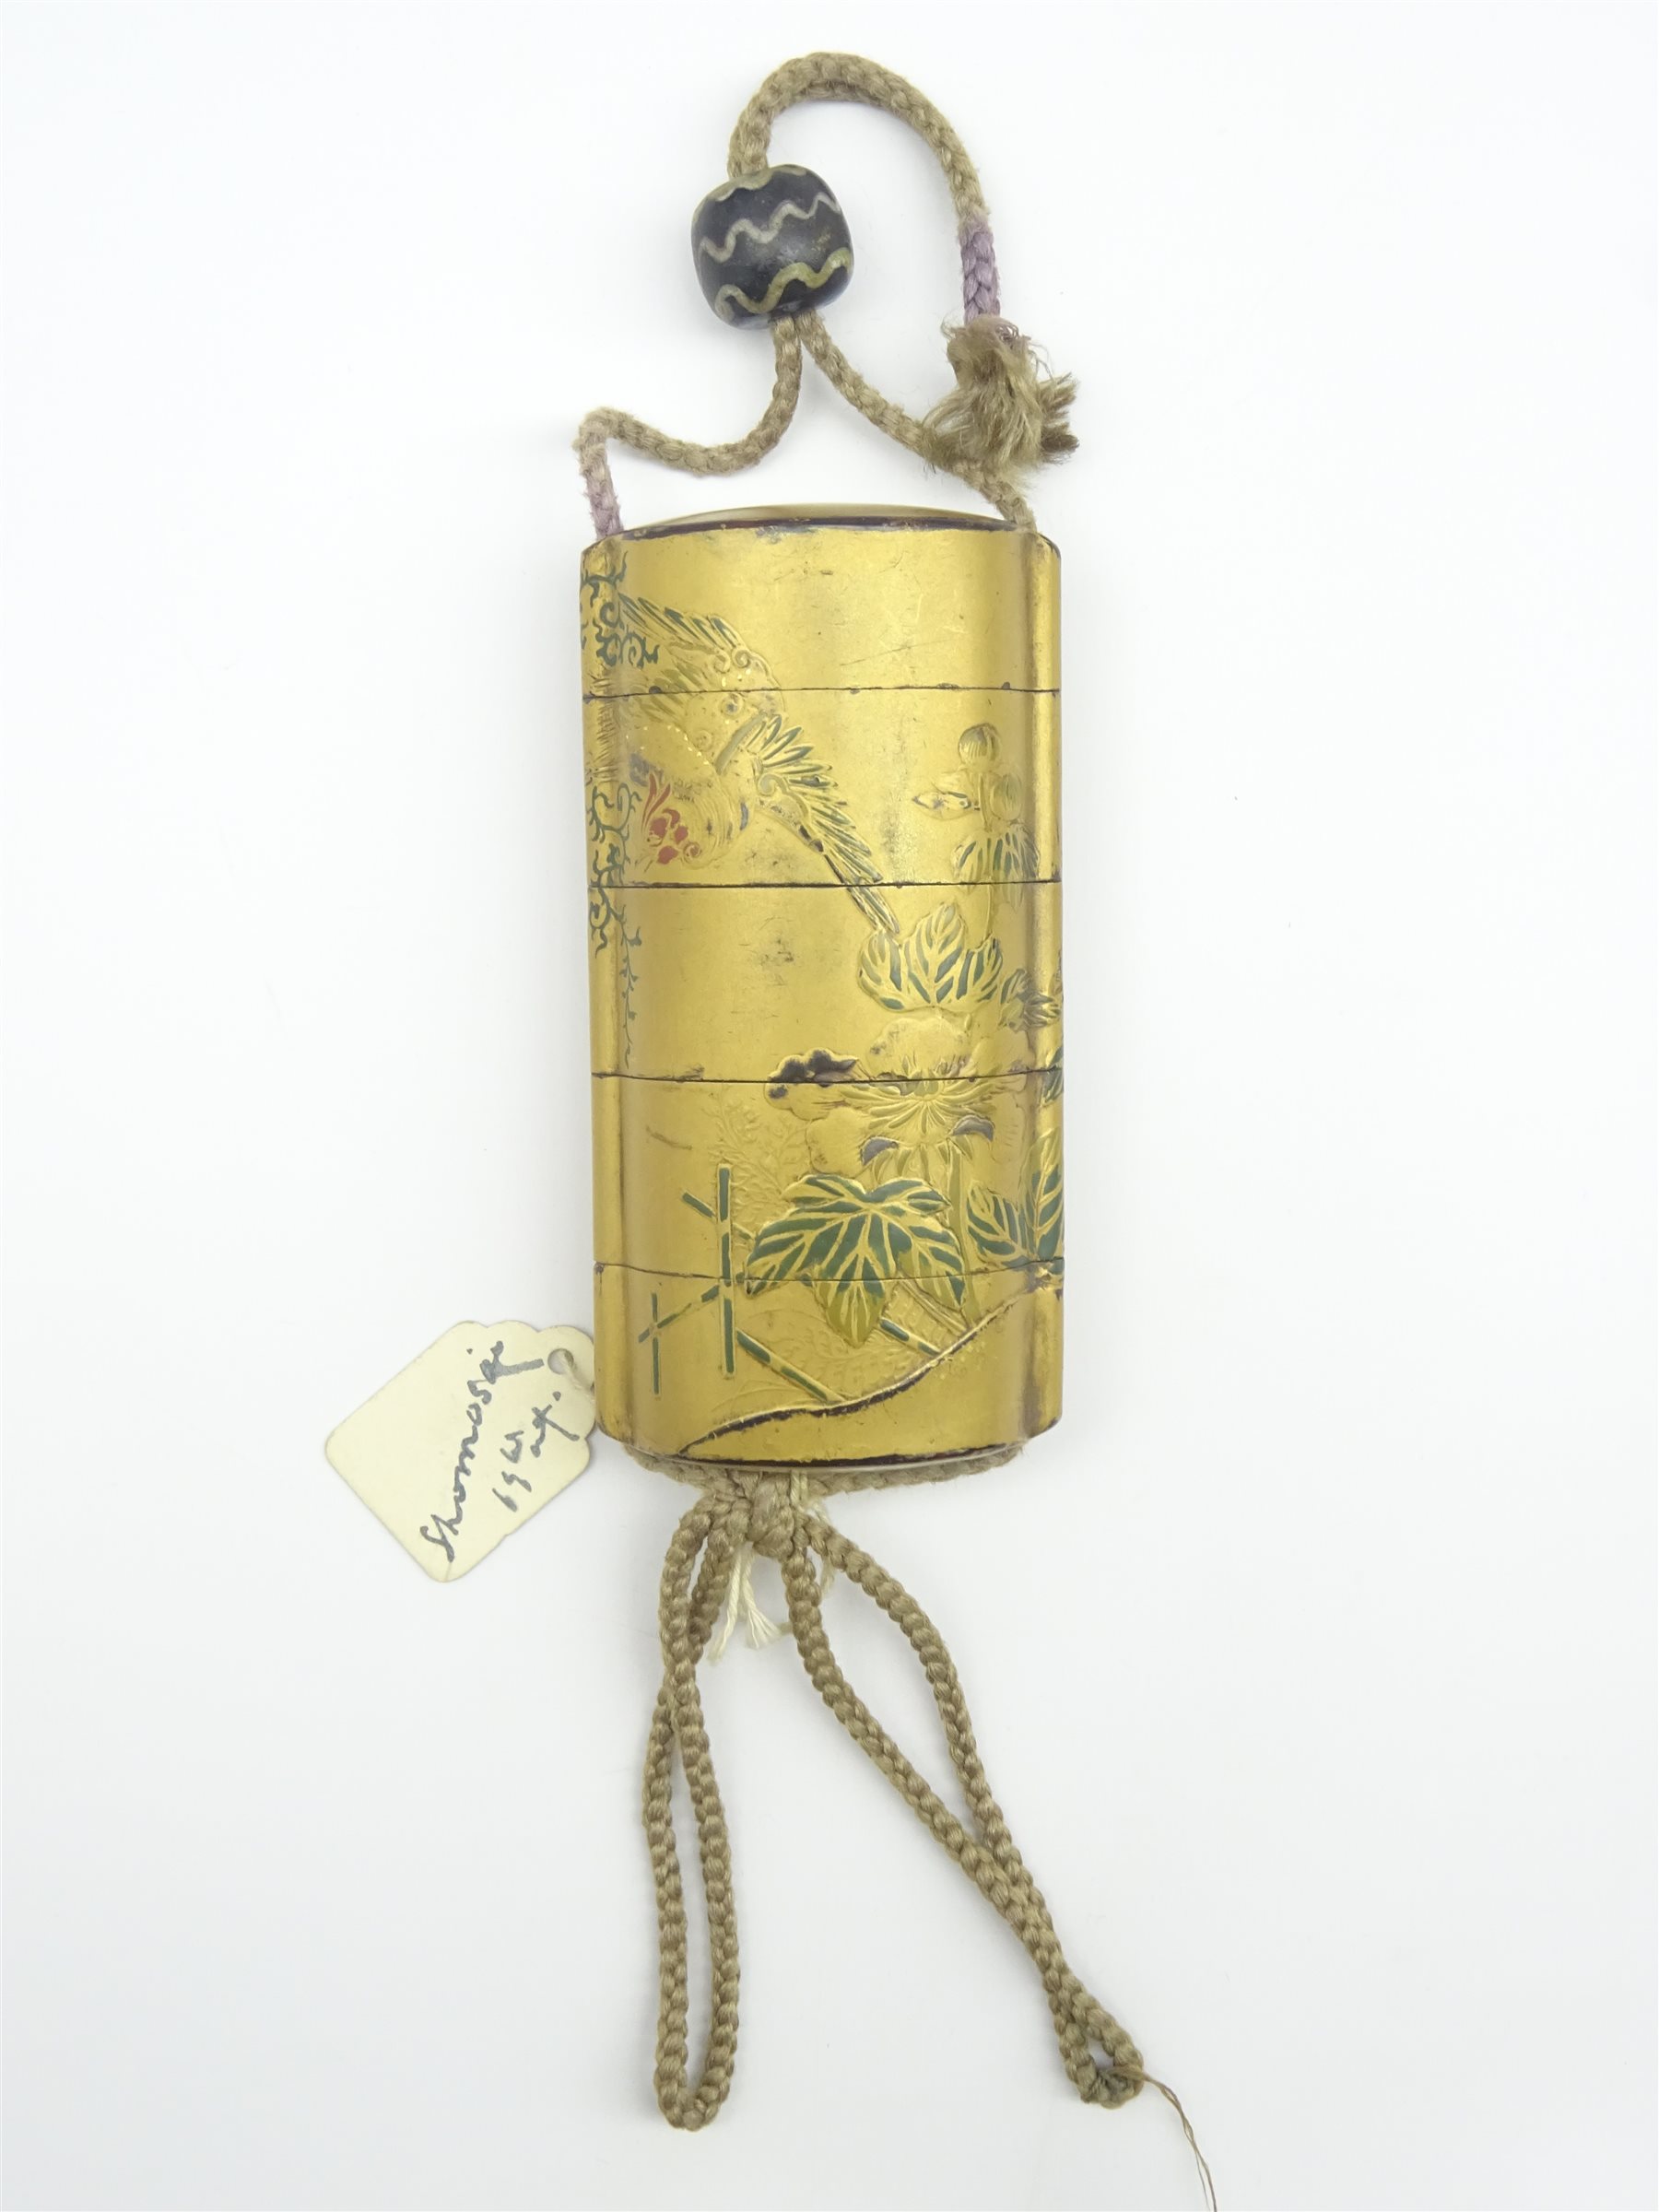 Japanese 19th Century Four Case Lacquer Inro With A Ho Ho Bird In Flight Above Flowers On A Gold